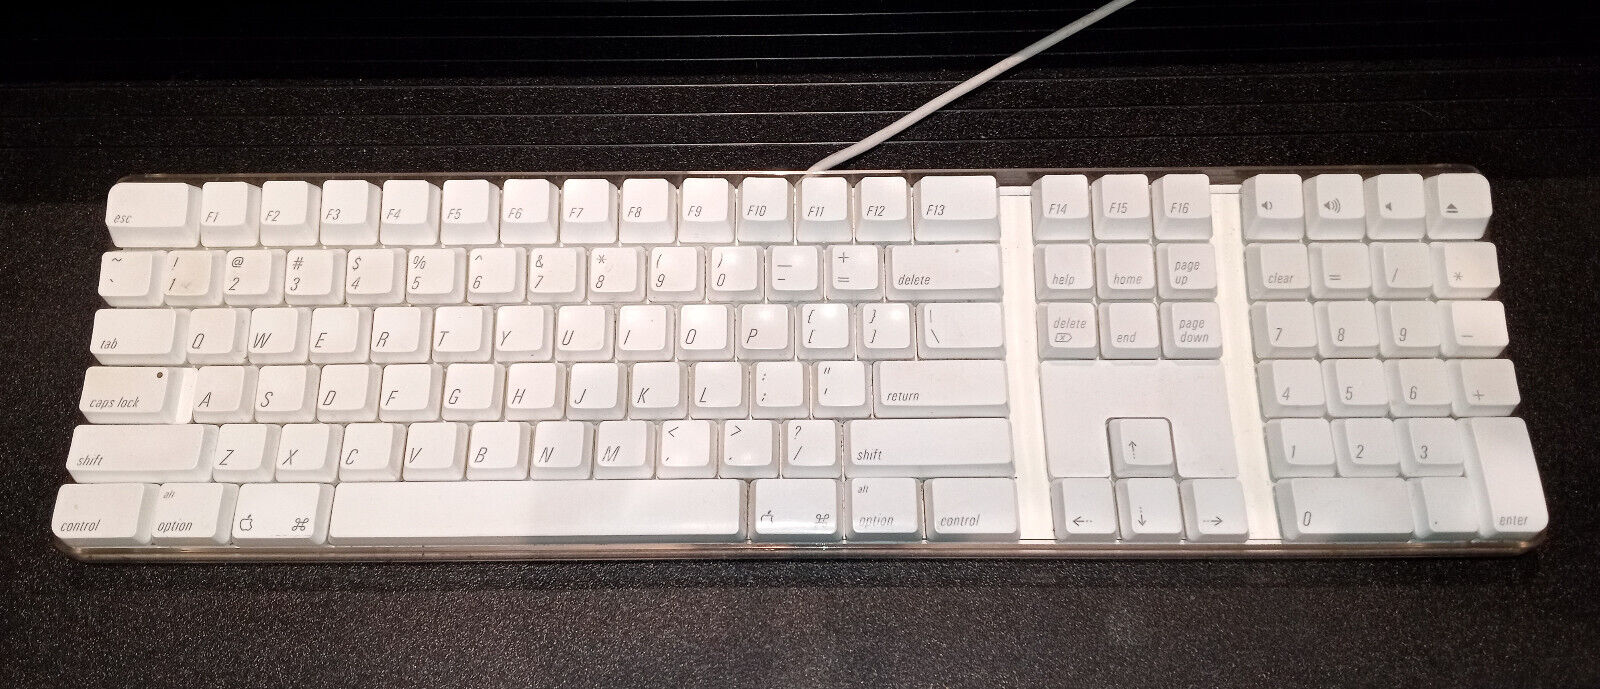 vintage Apple keyboard A1048 white USB wired great condition tested & working